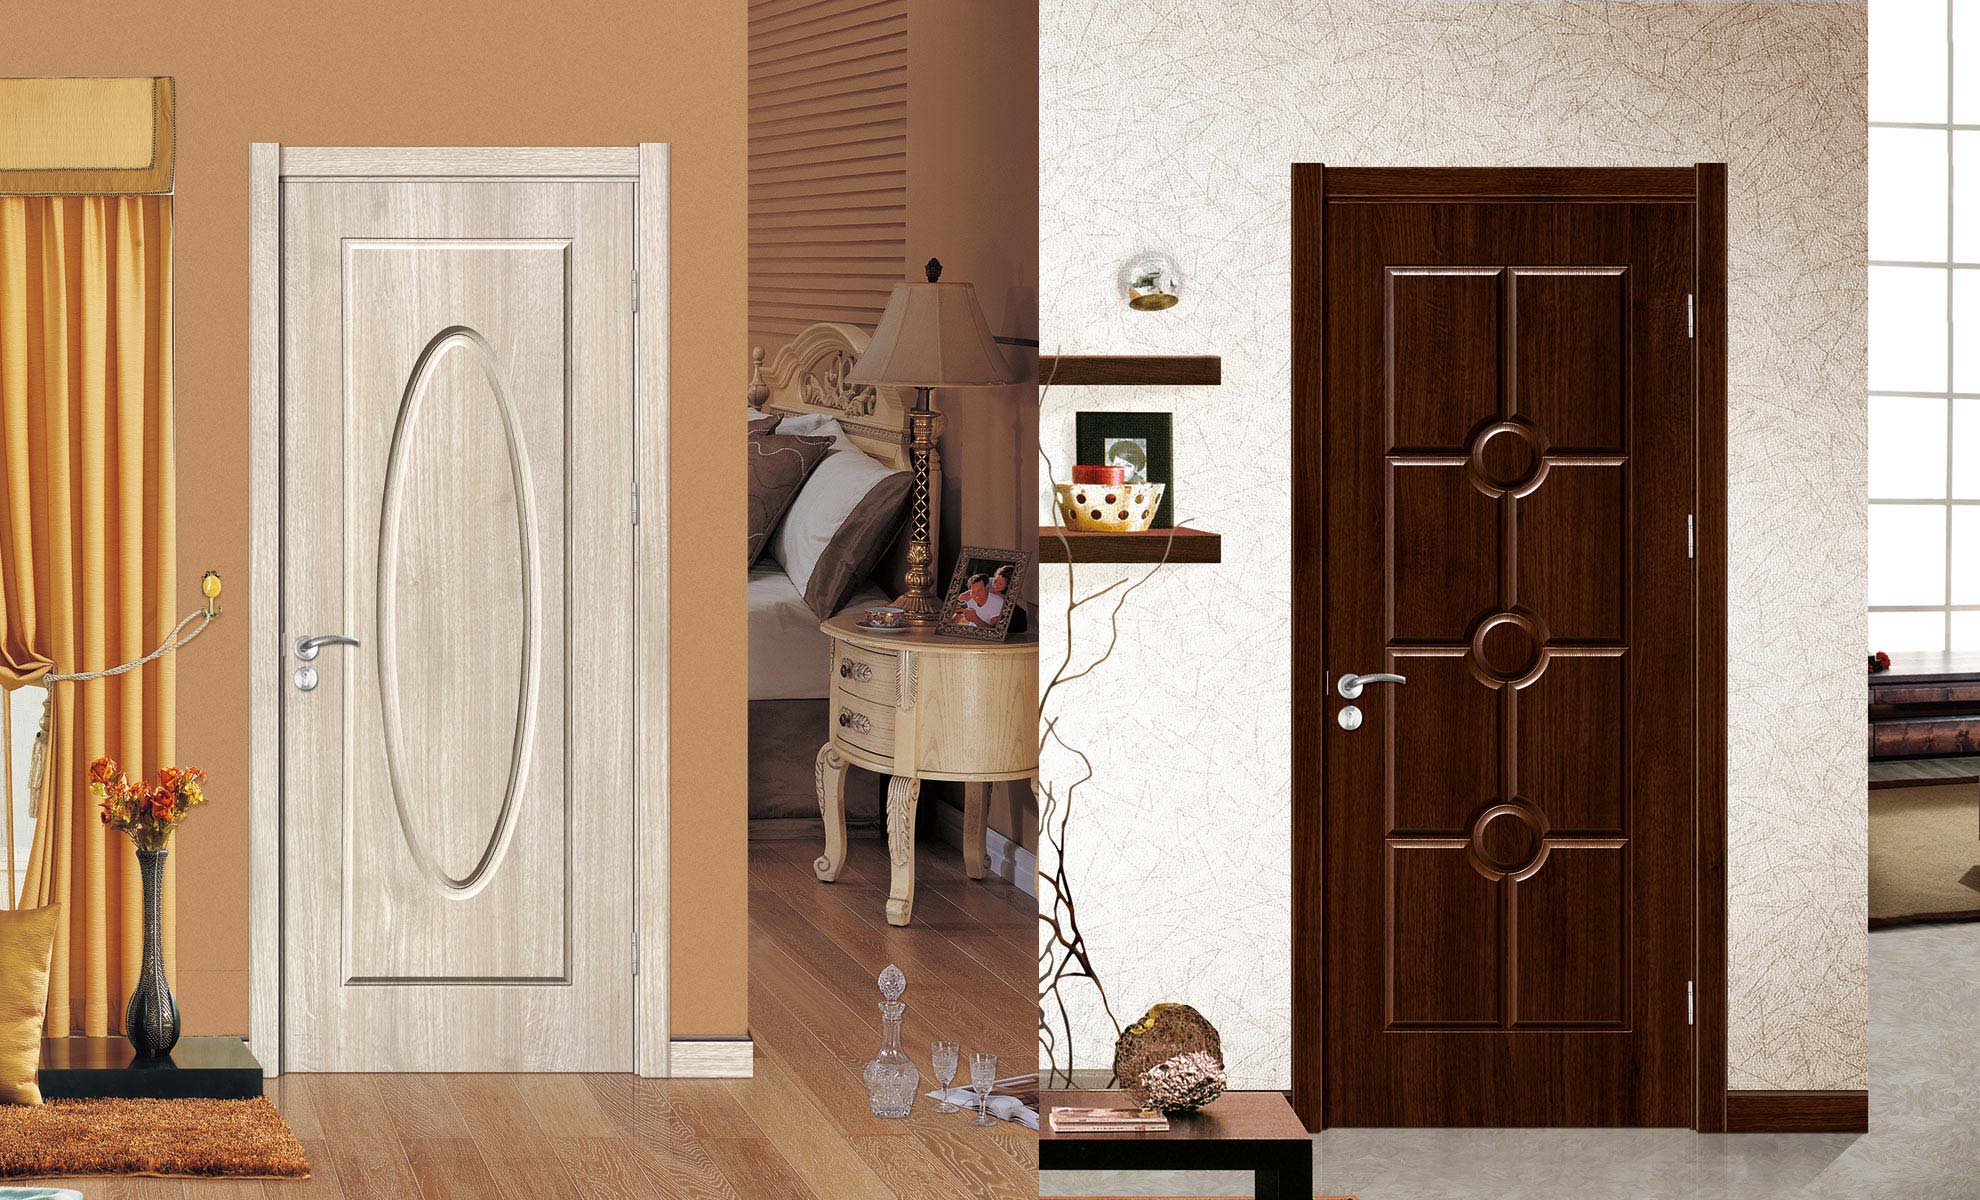 Interior Doors For Sale To Increase The Value Of Home